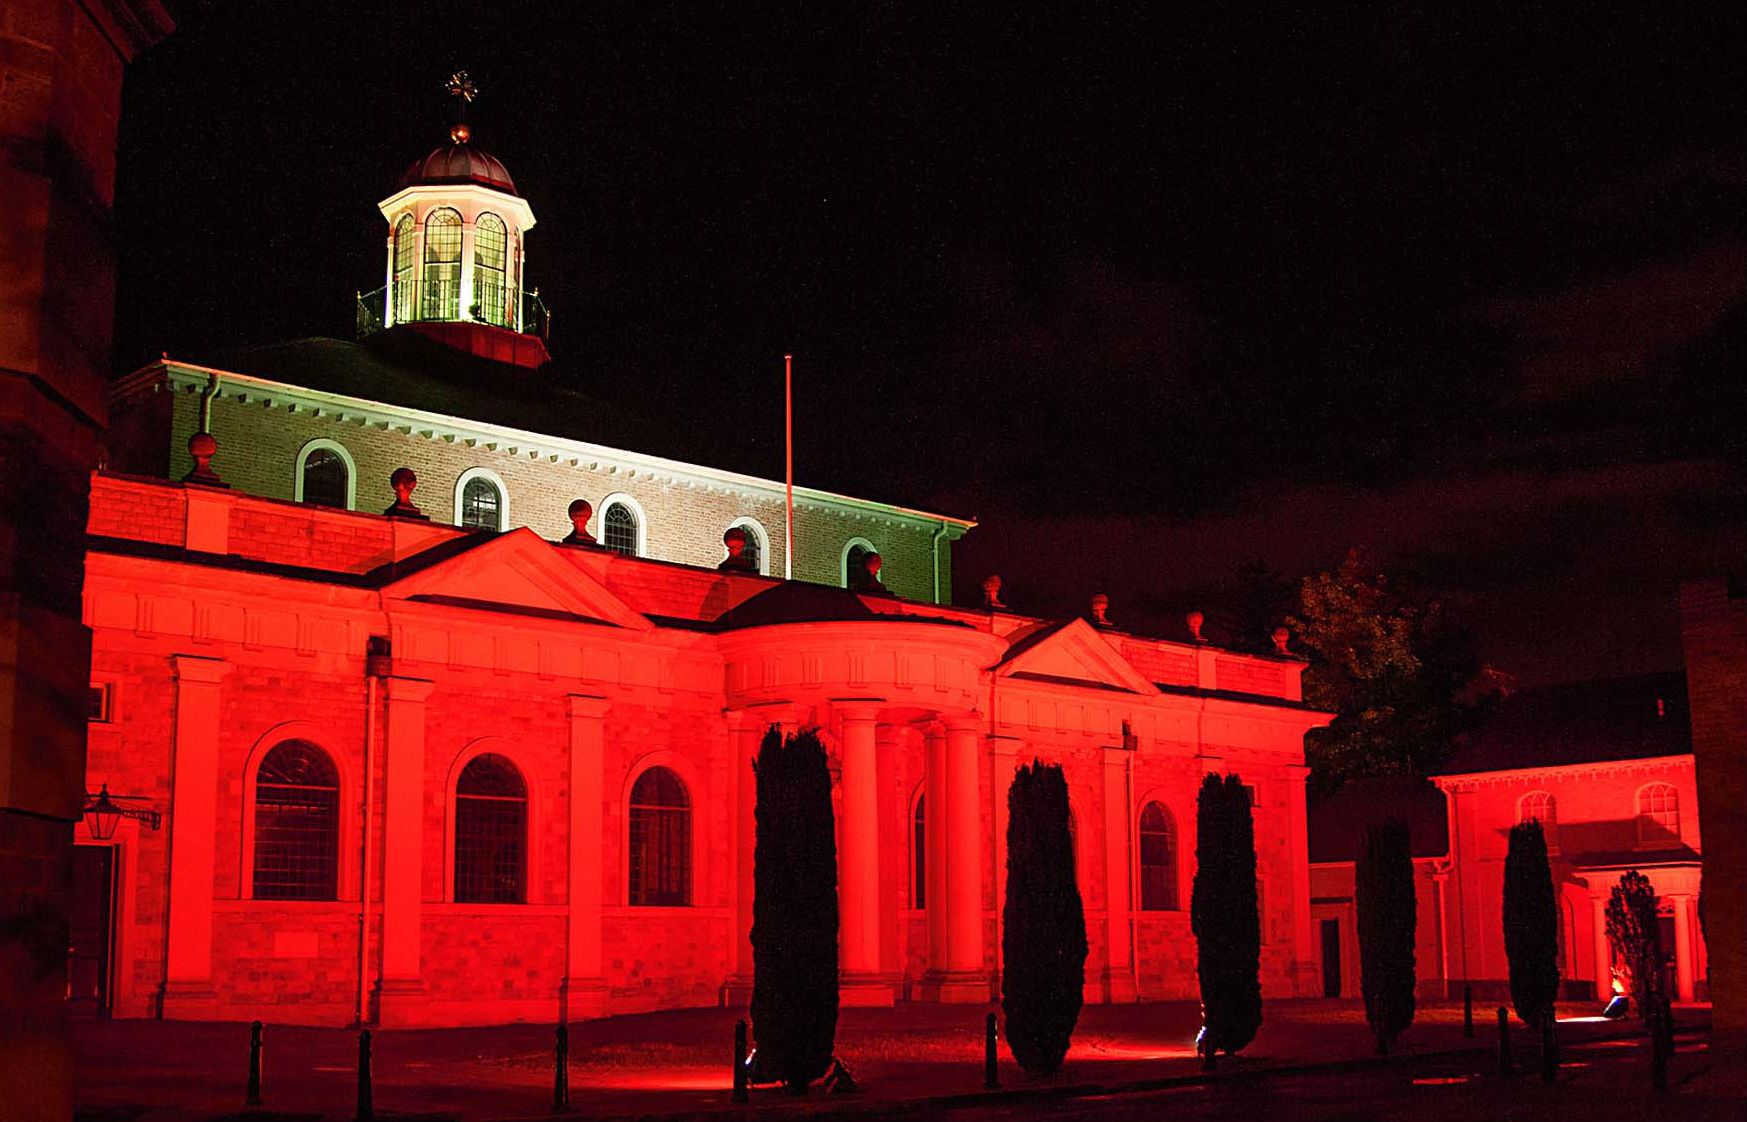 Brentwood Cathedral will turn red to raise awareness of Christian persecution in the Middle East